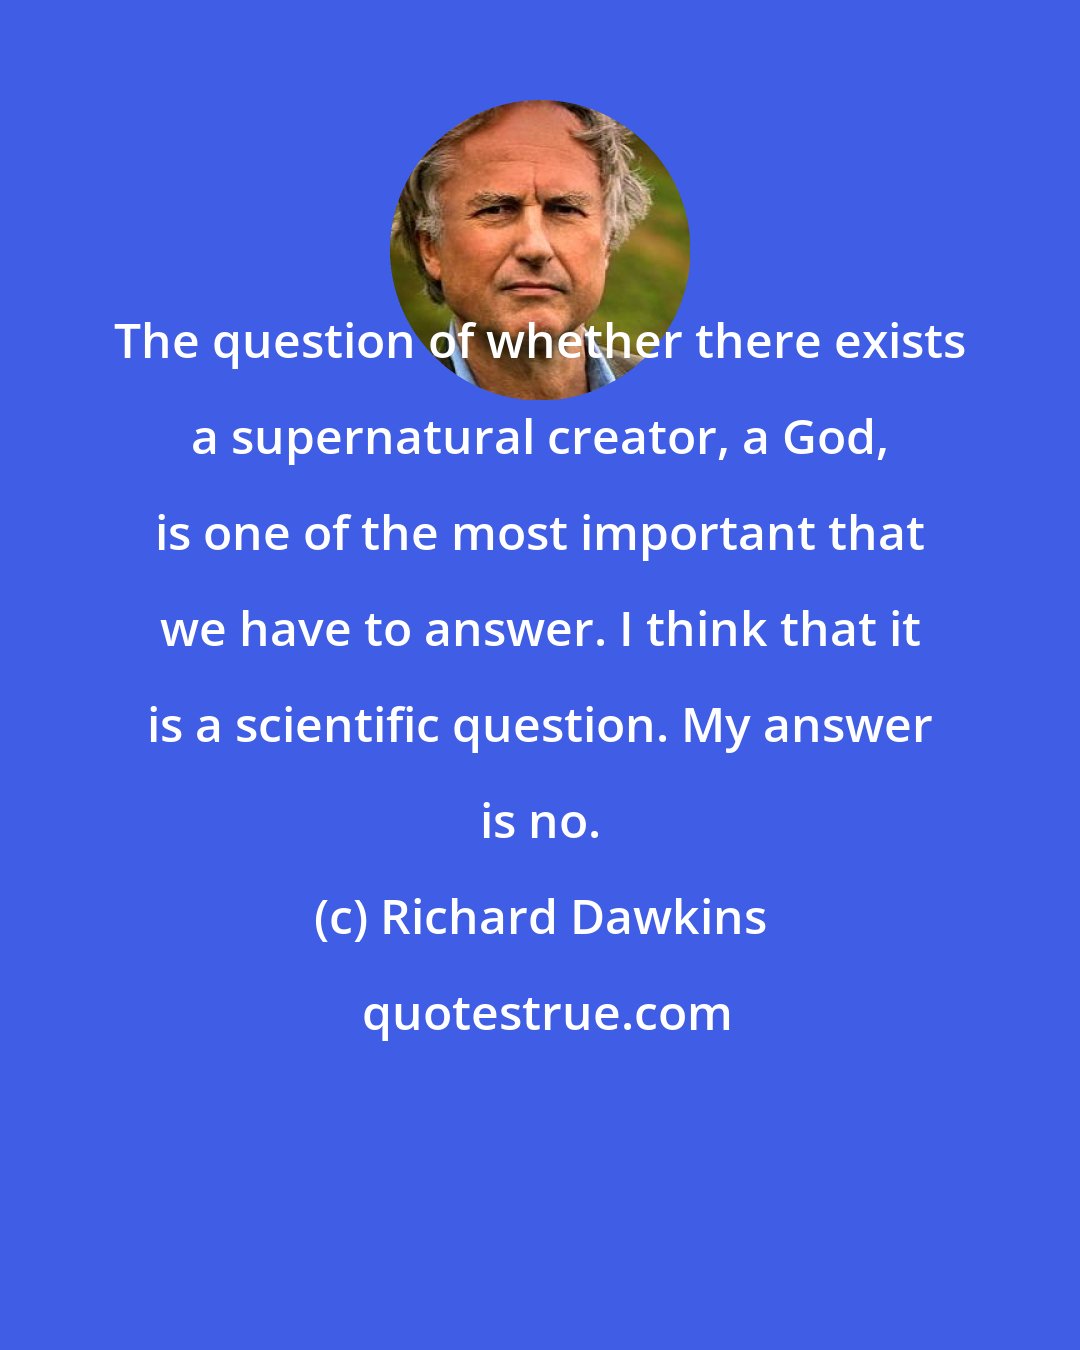 Richard Dawkins: The question of whether there exists a supernatural creator, a God, is one of the most important that we have to answer. I think that it is a scientific question. My answer is no.